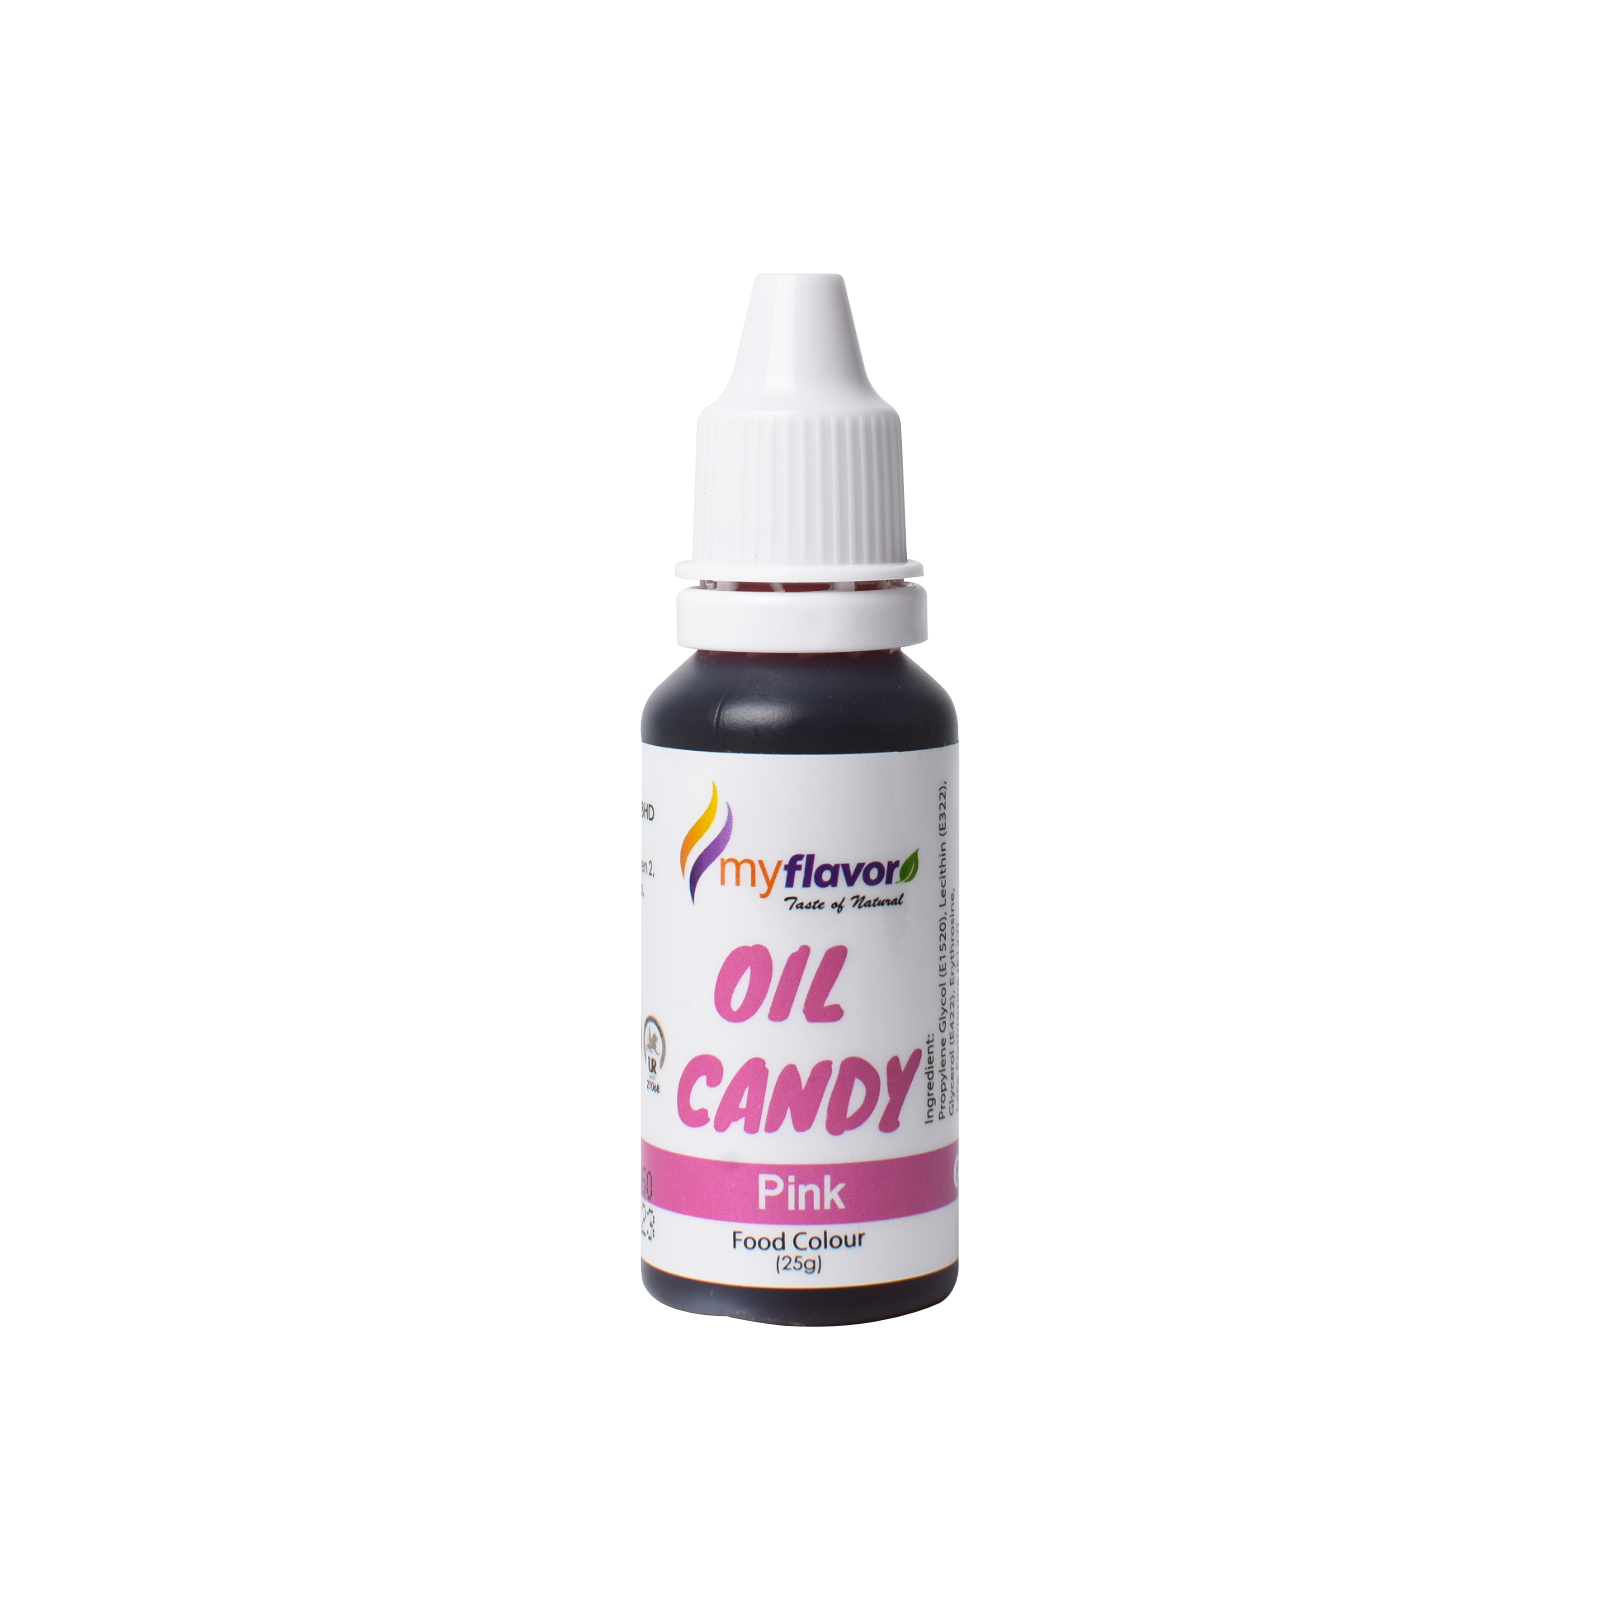 myflavor oil candy pink.png